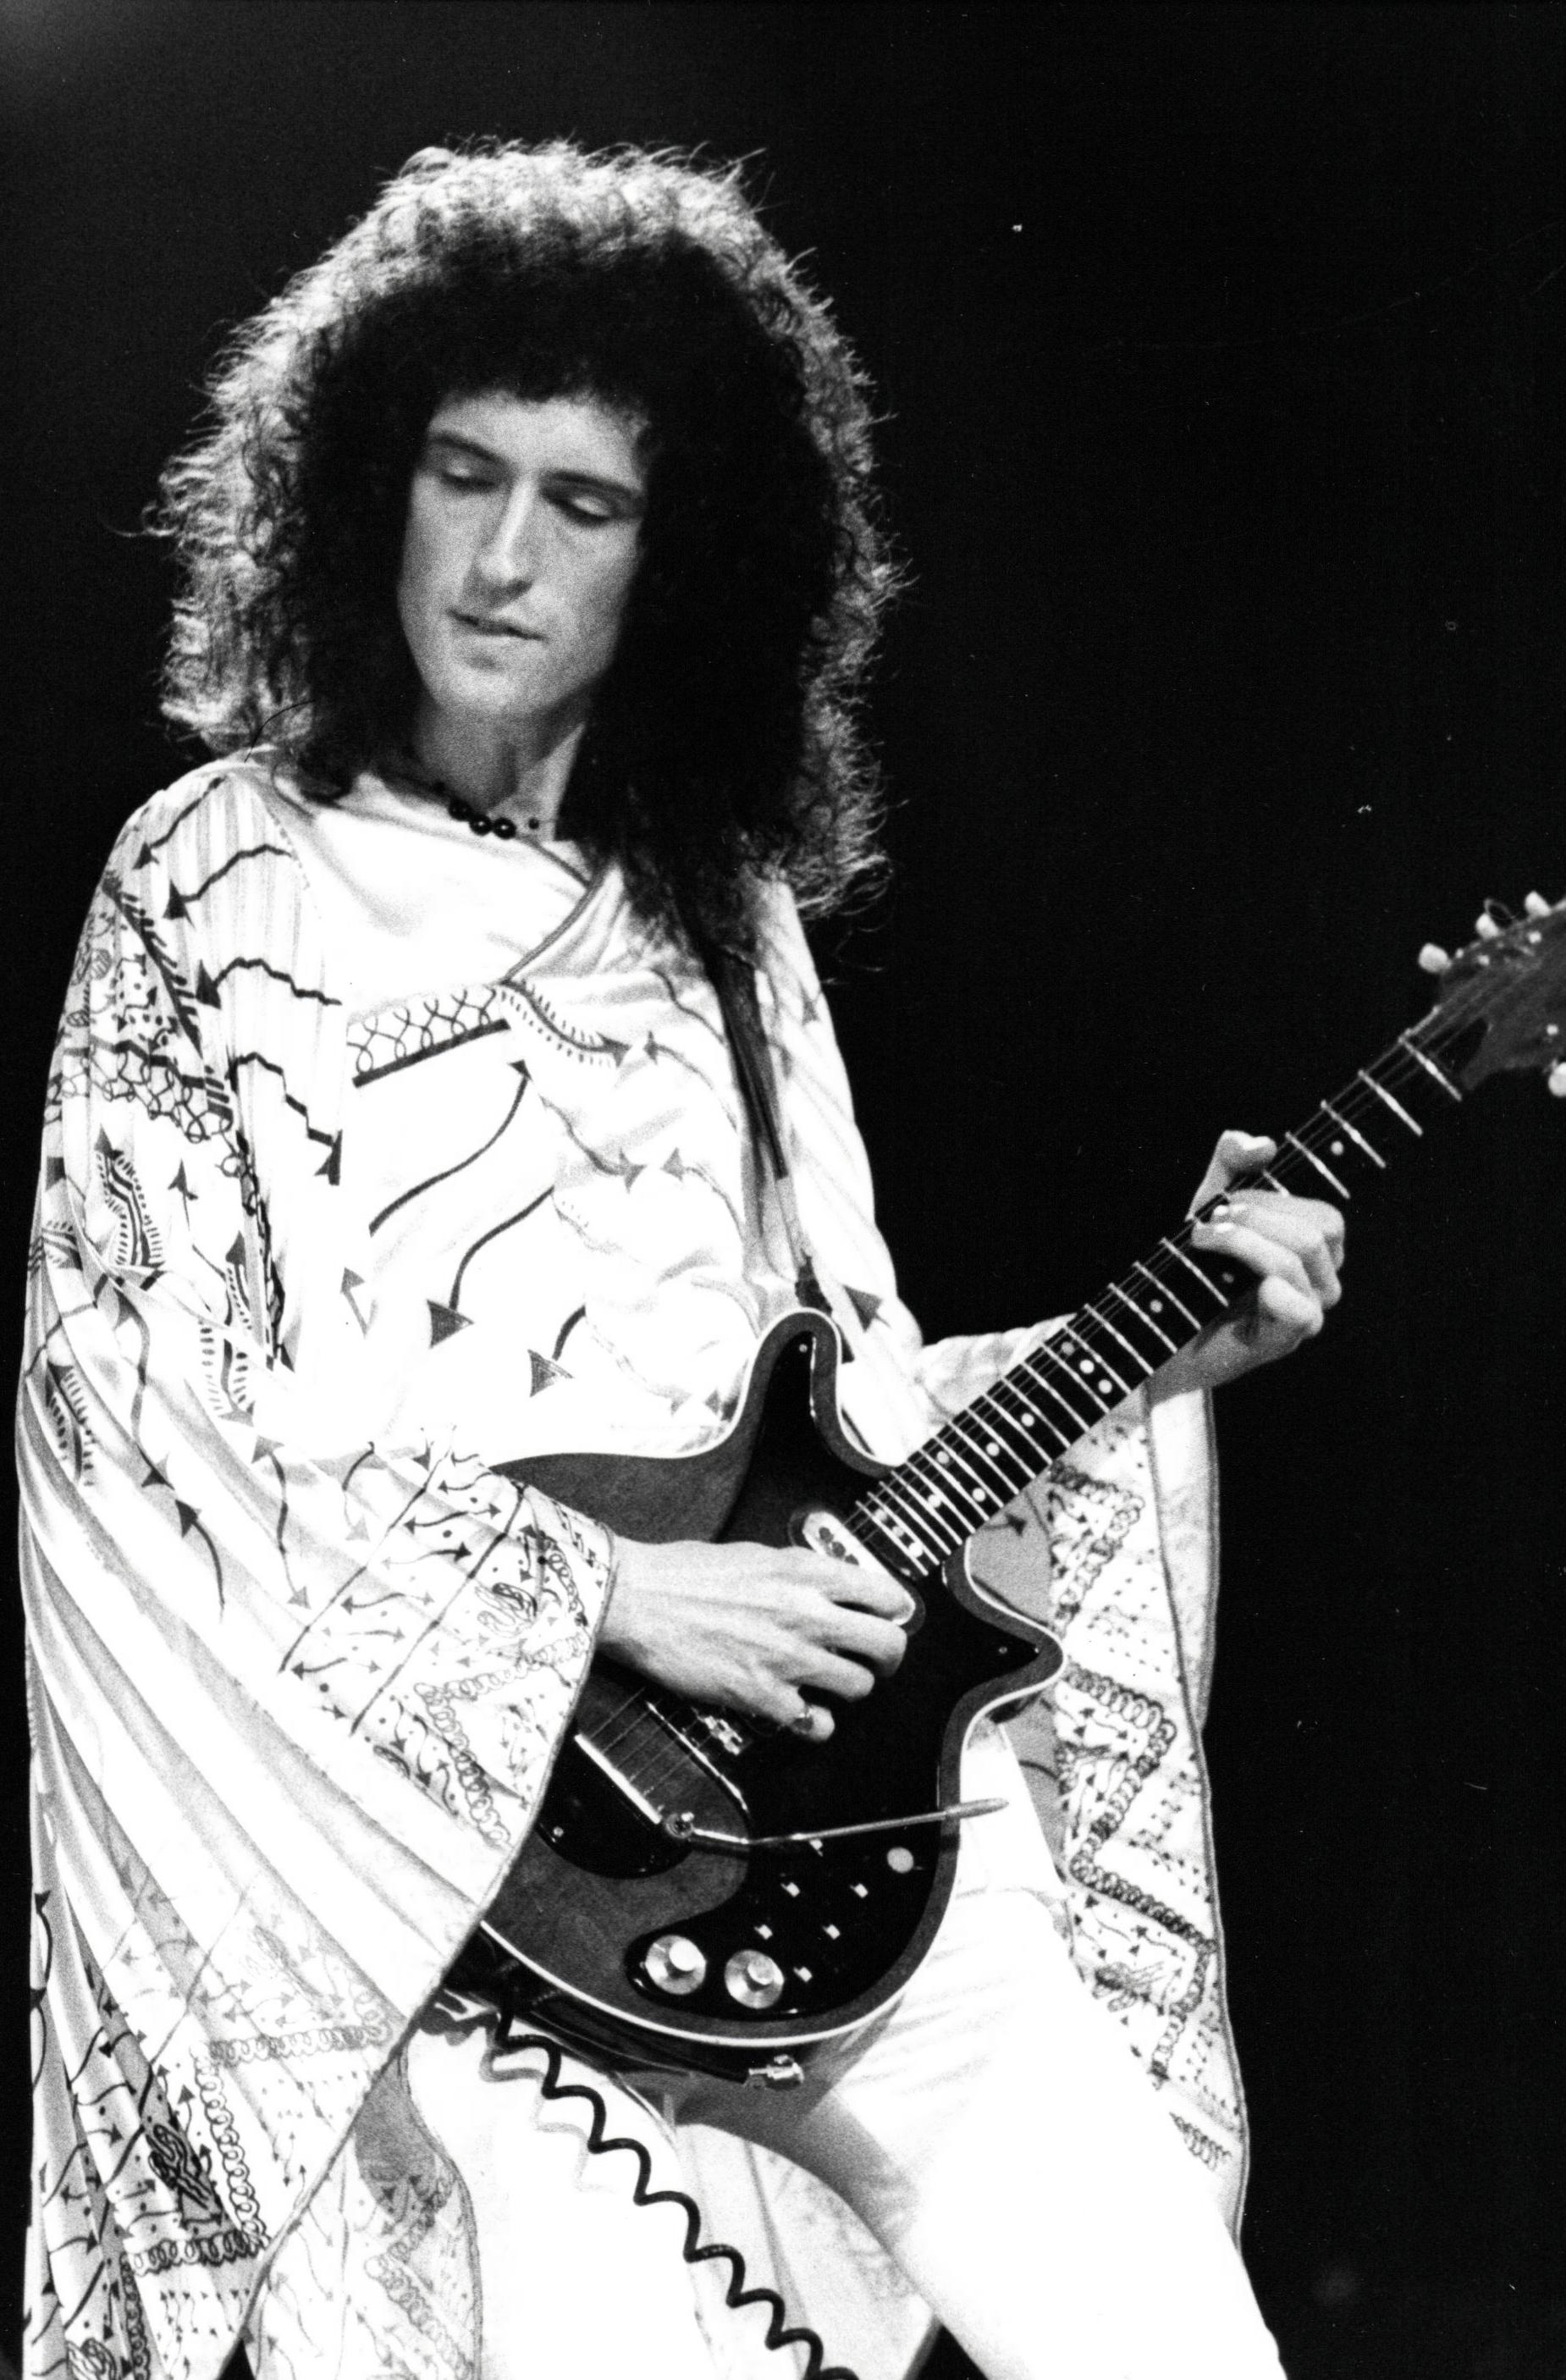 Michael Putland Portrait Photograph - Brian May of Queen Playing Guitar on Stage Vintage Original Photograph